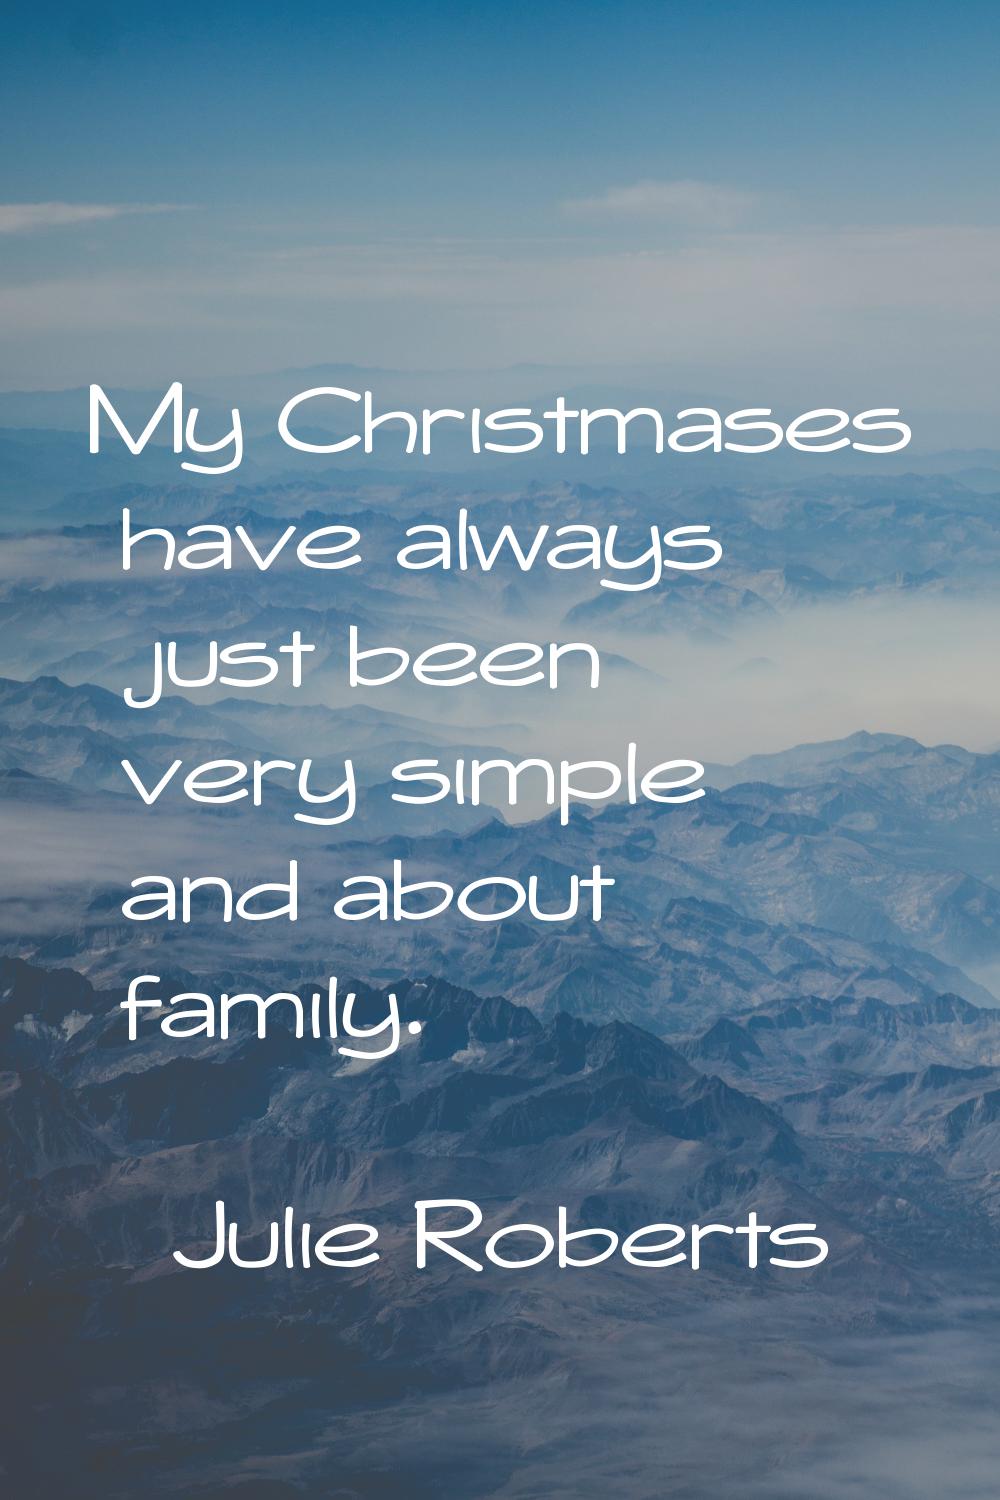 My Christmases have always just been very simple and about family.